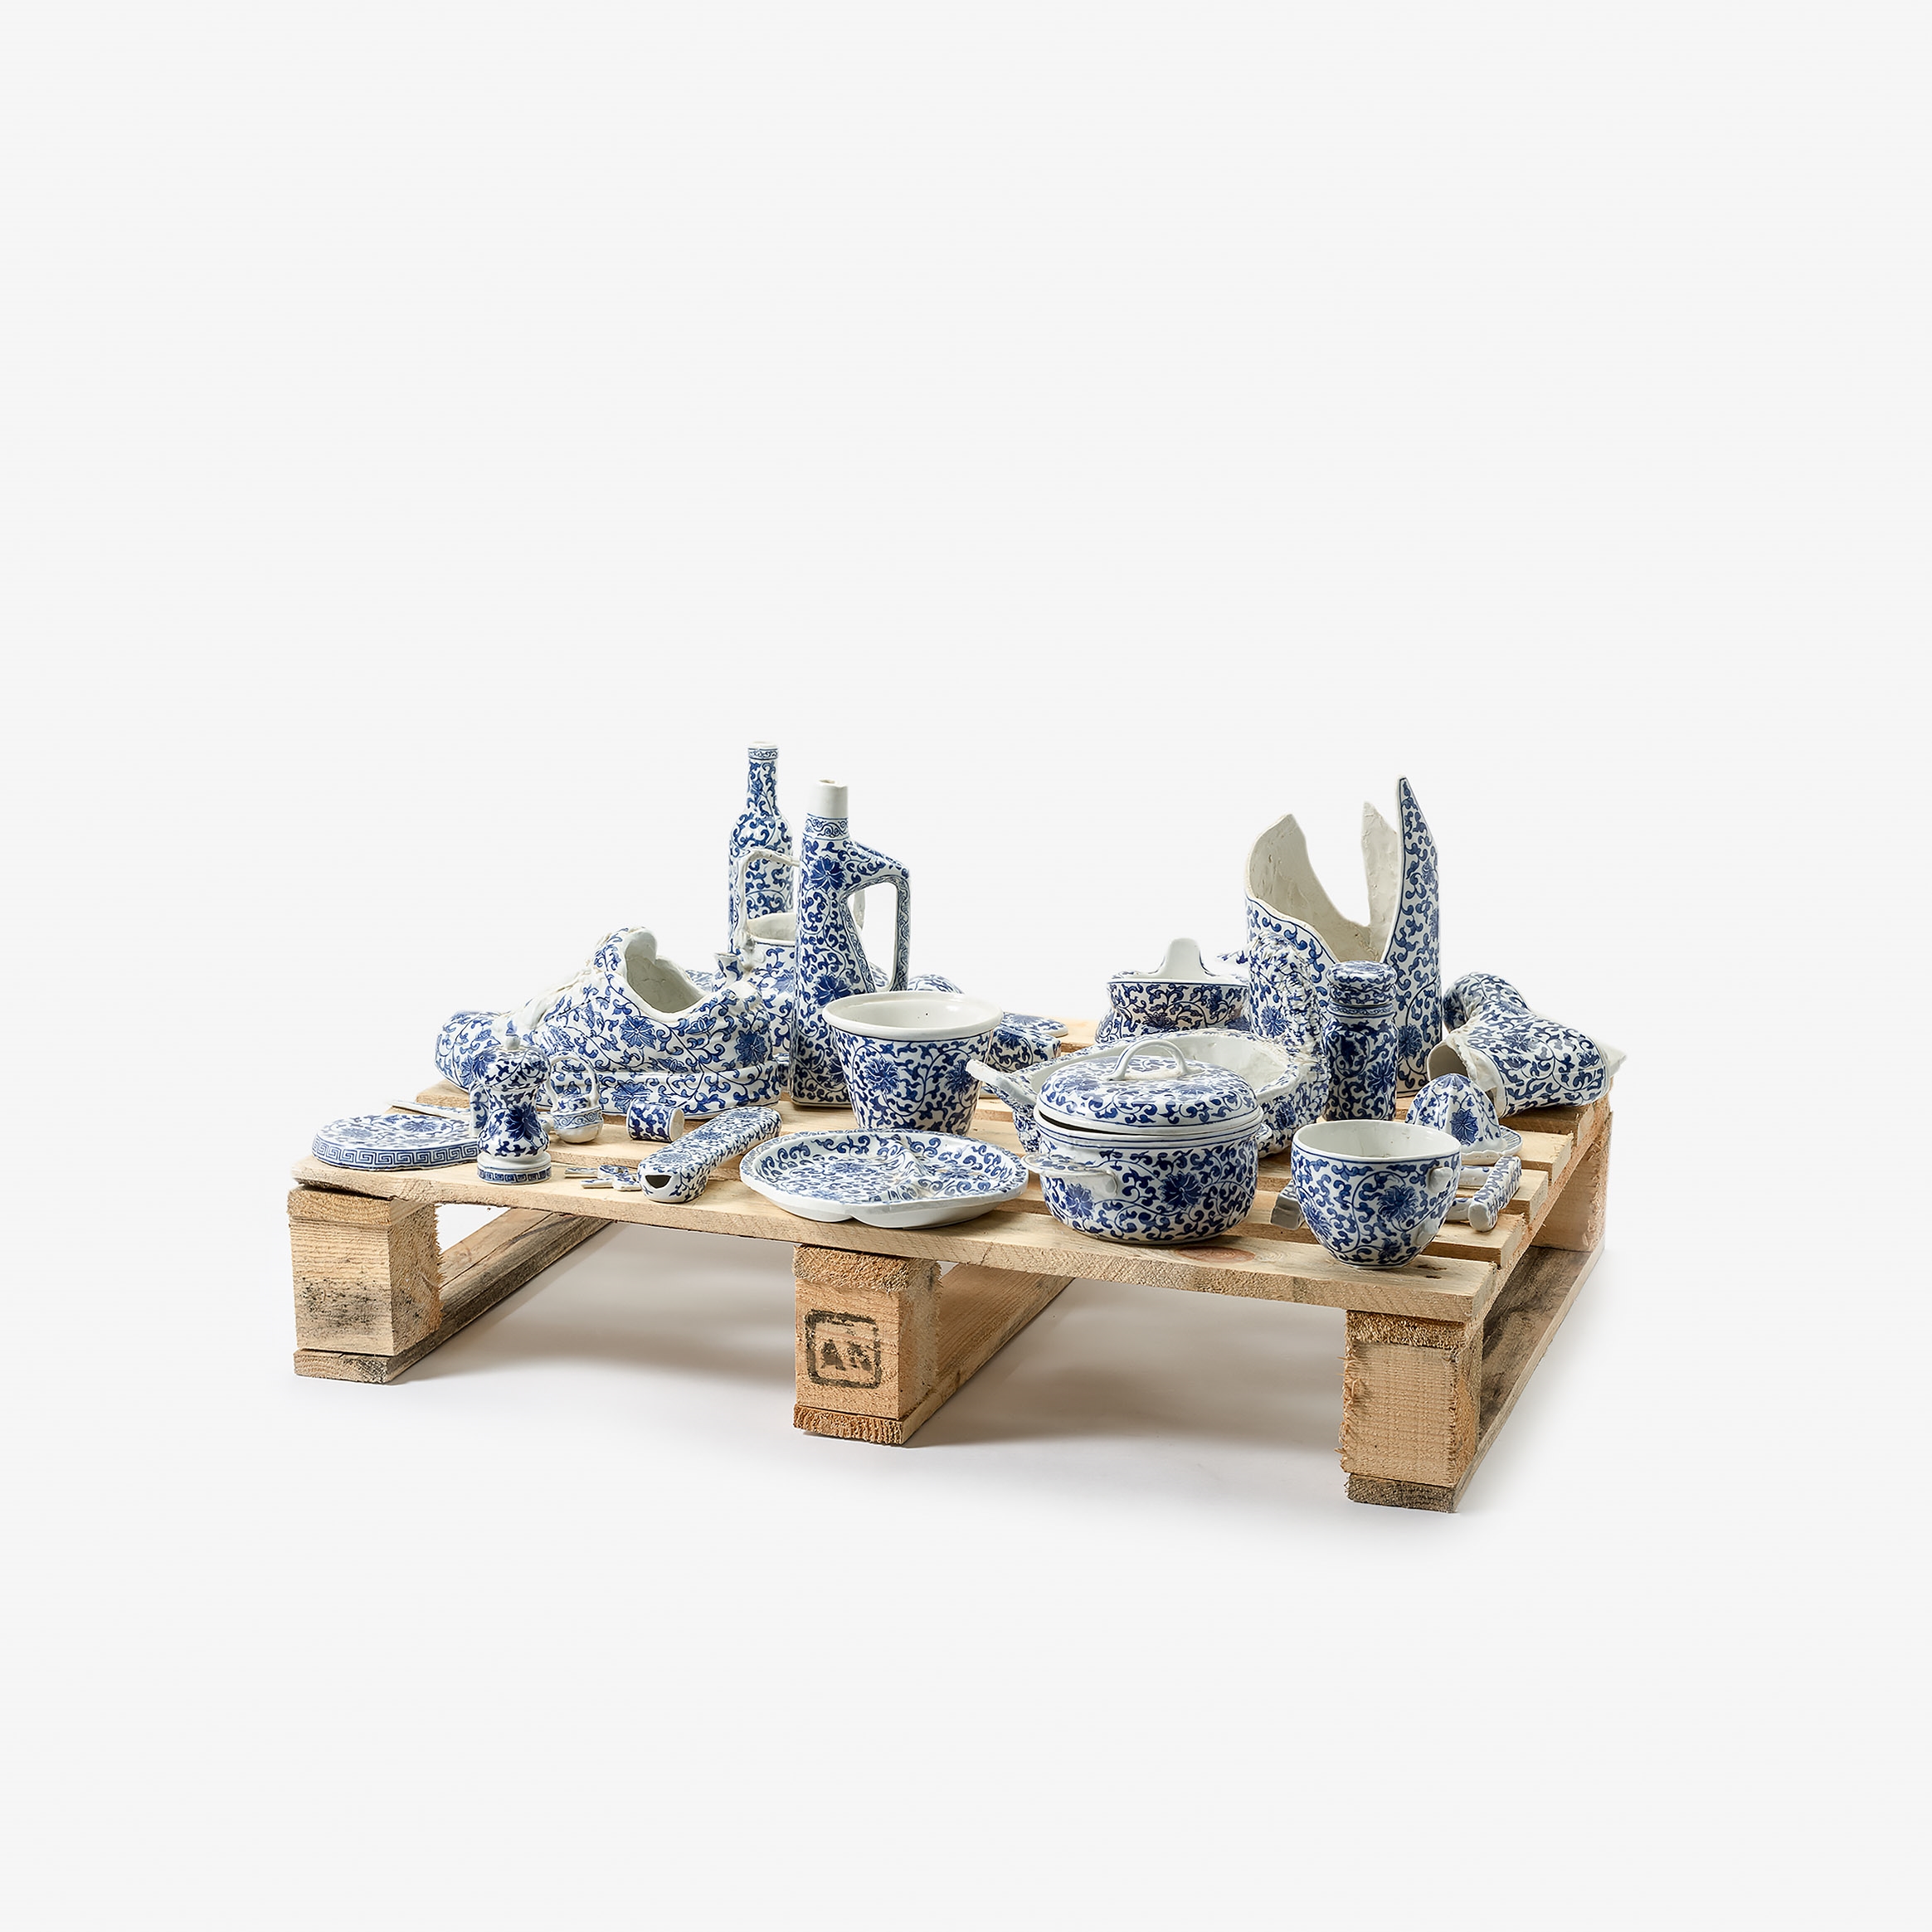 Artwork by Ni Haifeng, Of the Departure and the Arrival, Made of Hand painted porcelain objects on a pallet